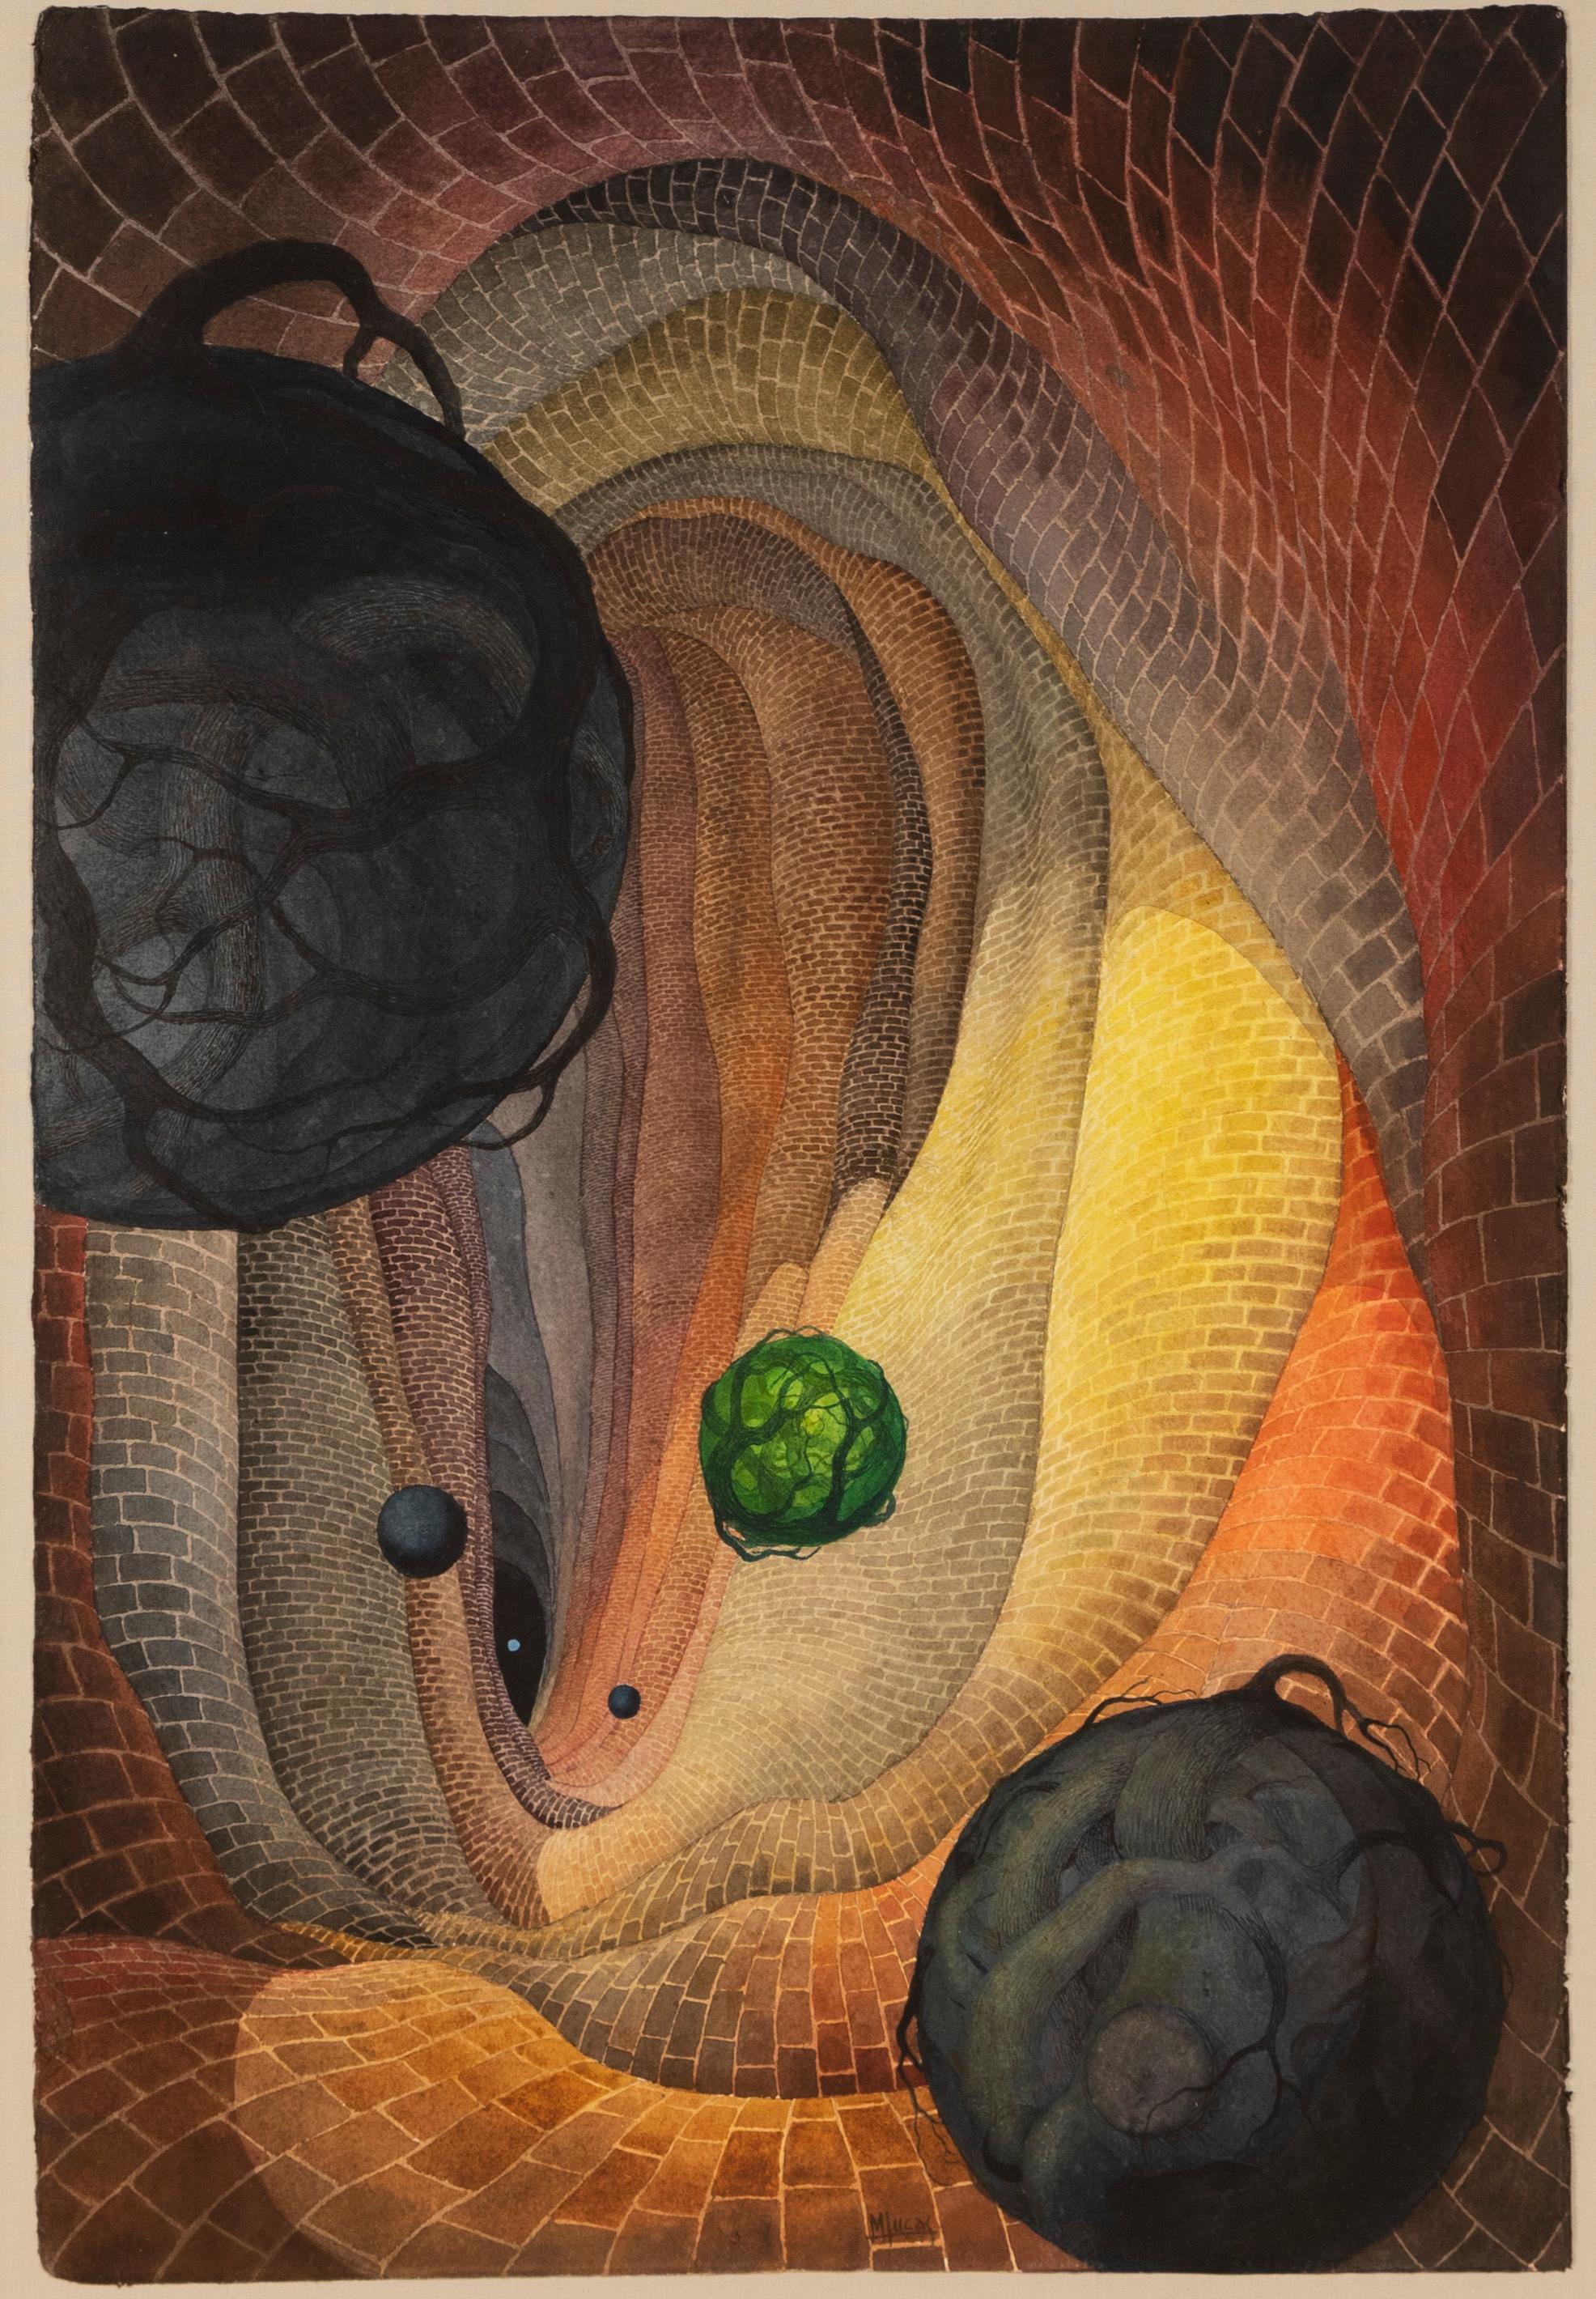 Antique surreal interior landscape abstract.  Gouache and watercolor on board, circa 1950.  Signed.  Image size, 21L x 31H.  Housed in a period frame.